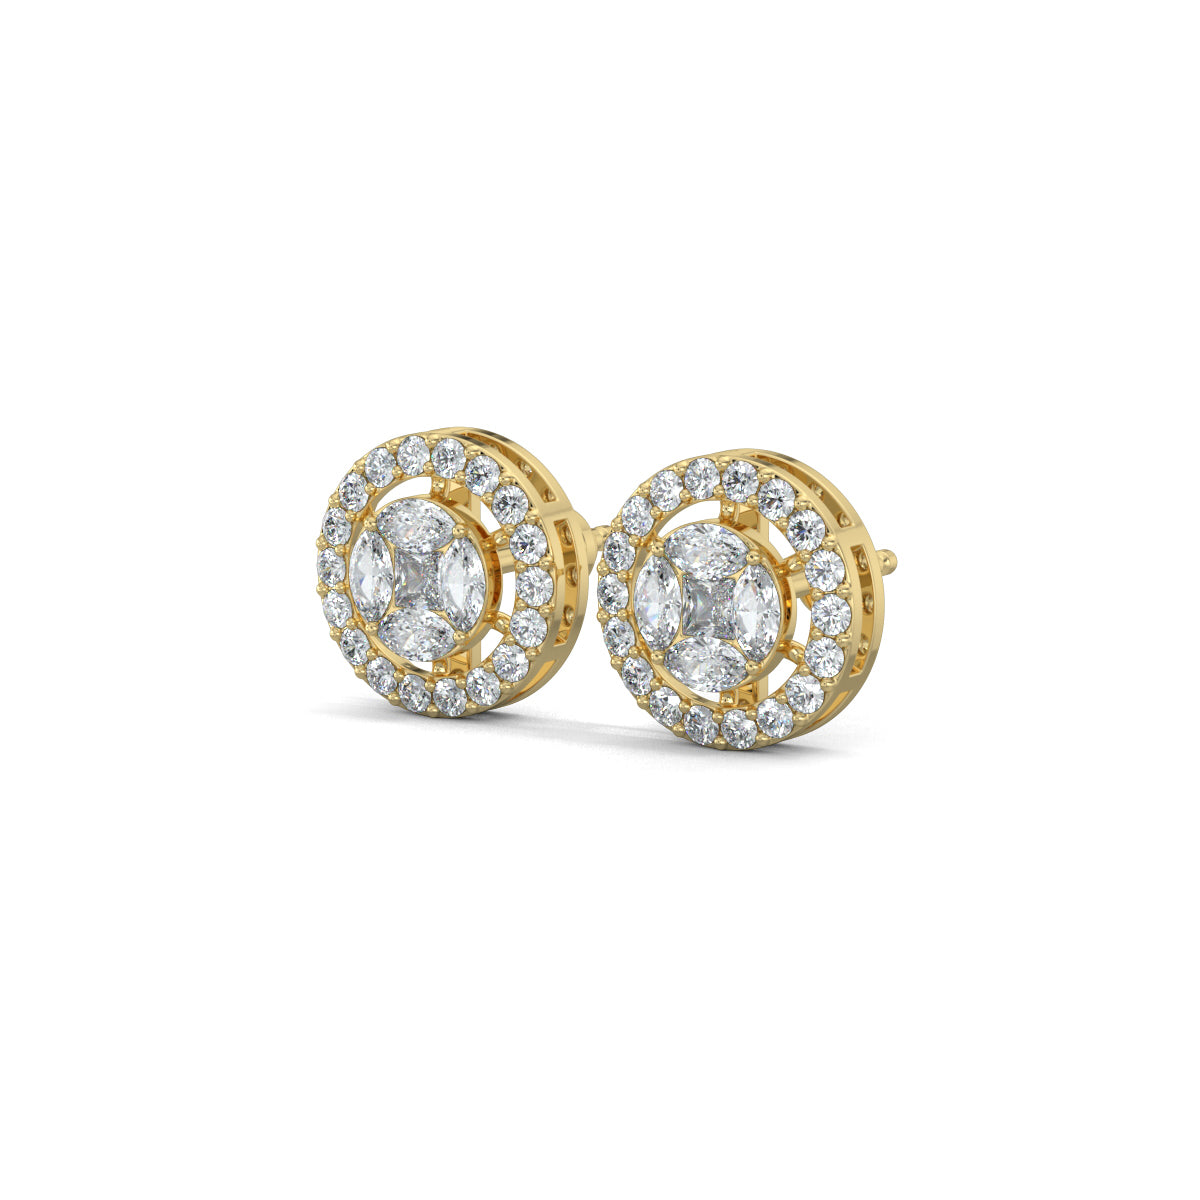 Yellow Gold, Diamond Earrings, Cirque Crown Stud Earrings, Natural diamonds, Lab-grown diamond halo setting studs with round, princess cut, and marquise diamonds